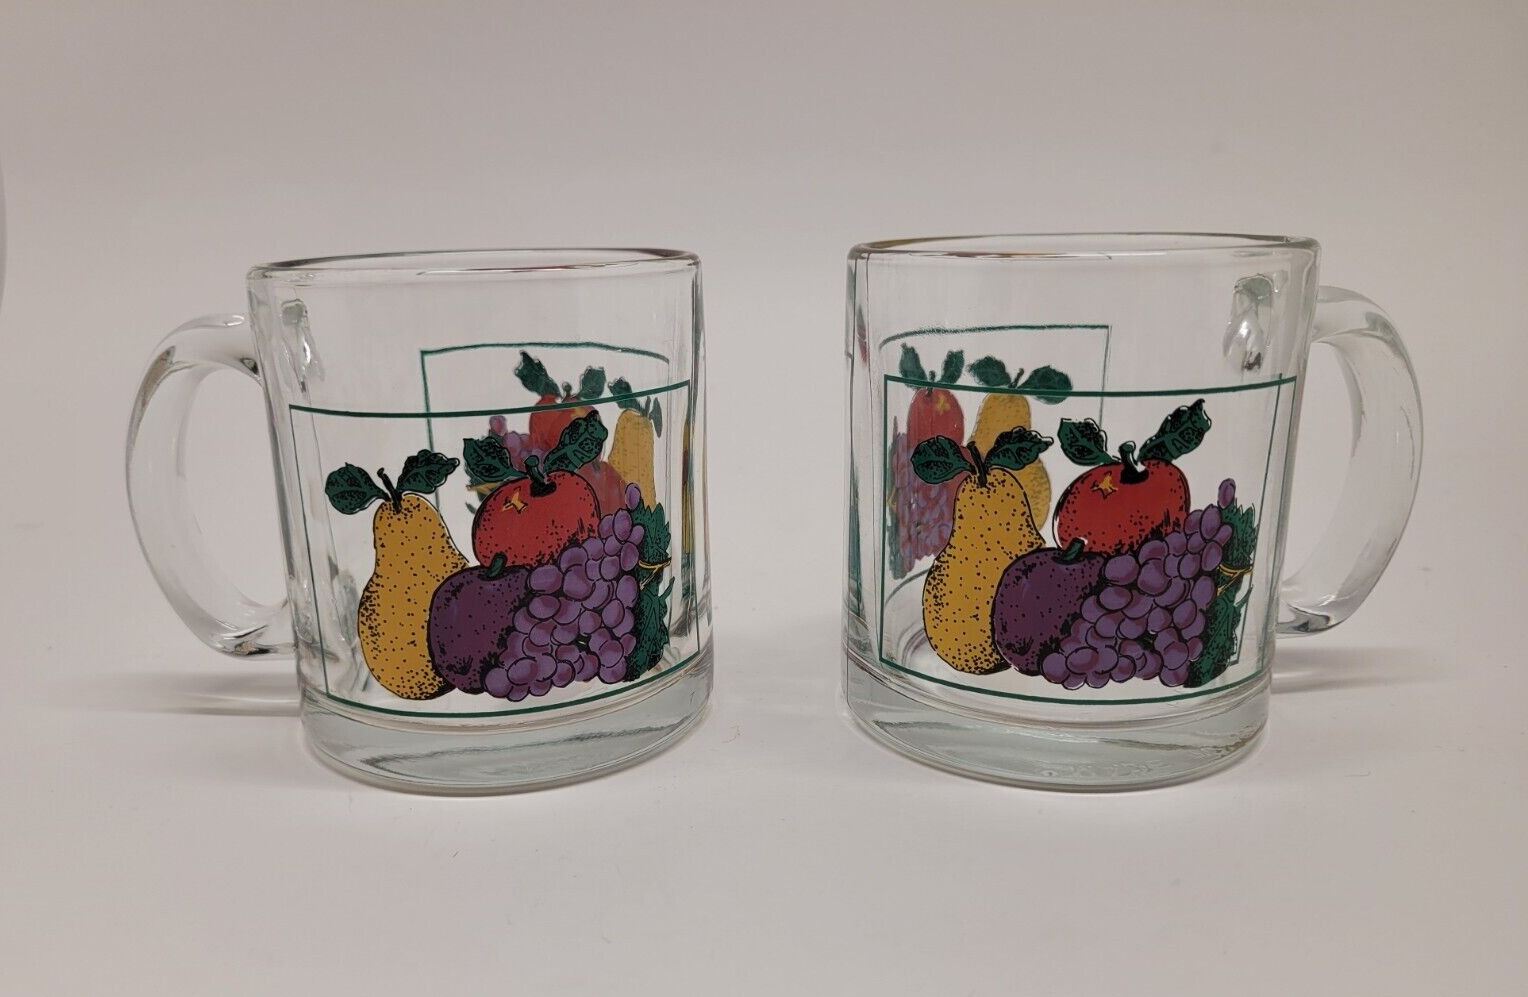 Vintage Pair of Heavy Clear Glass Mugs with Fruit Design - Made in the USA